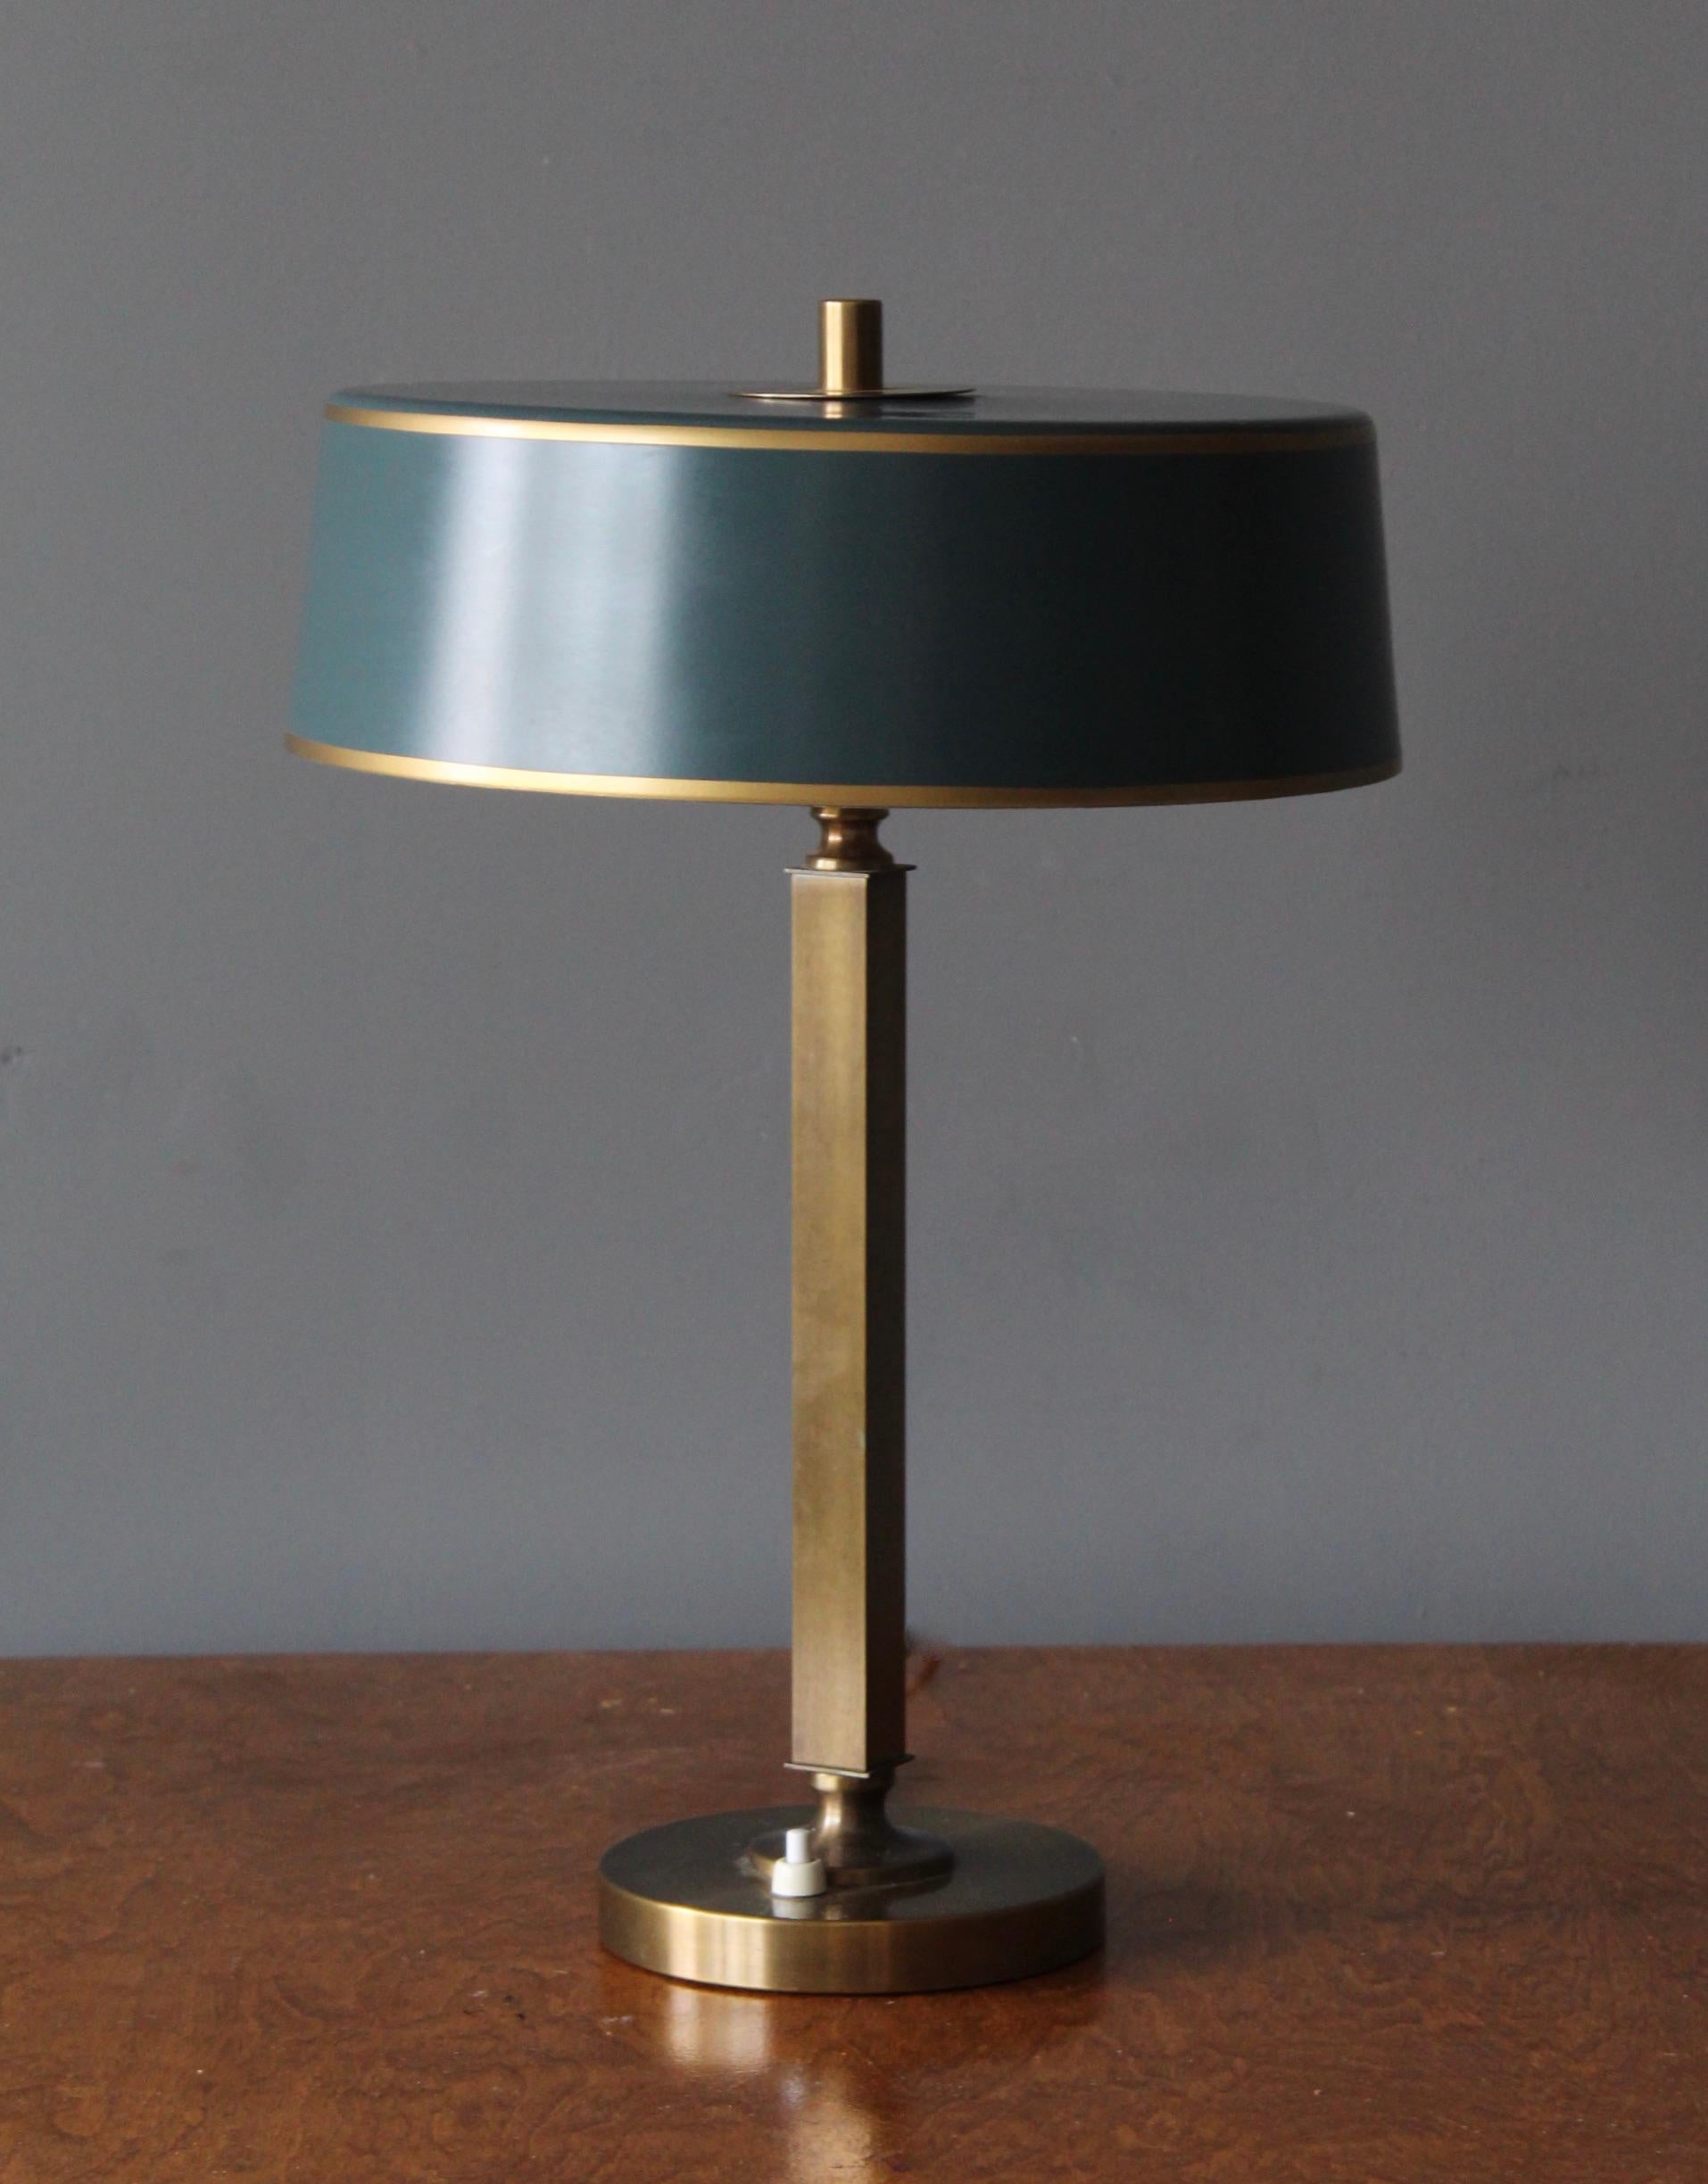 A table lamp. In brass, green lacquered metal lampshade.

Other designers of the period include Paavo Tynell, Josef Frank, Carl-Axel Acking, Alvar Aalto, and Bertil Brisborg.